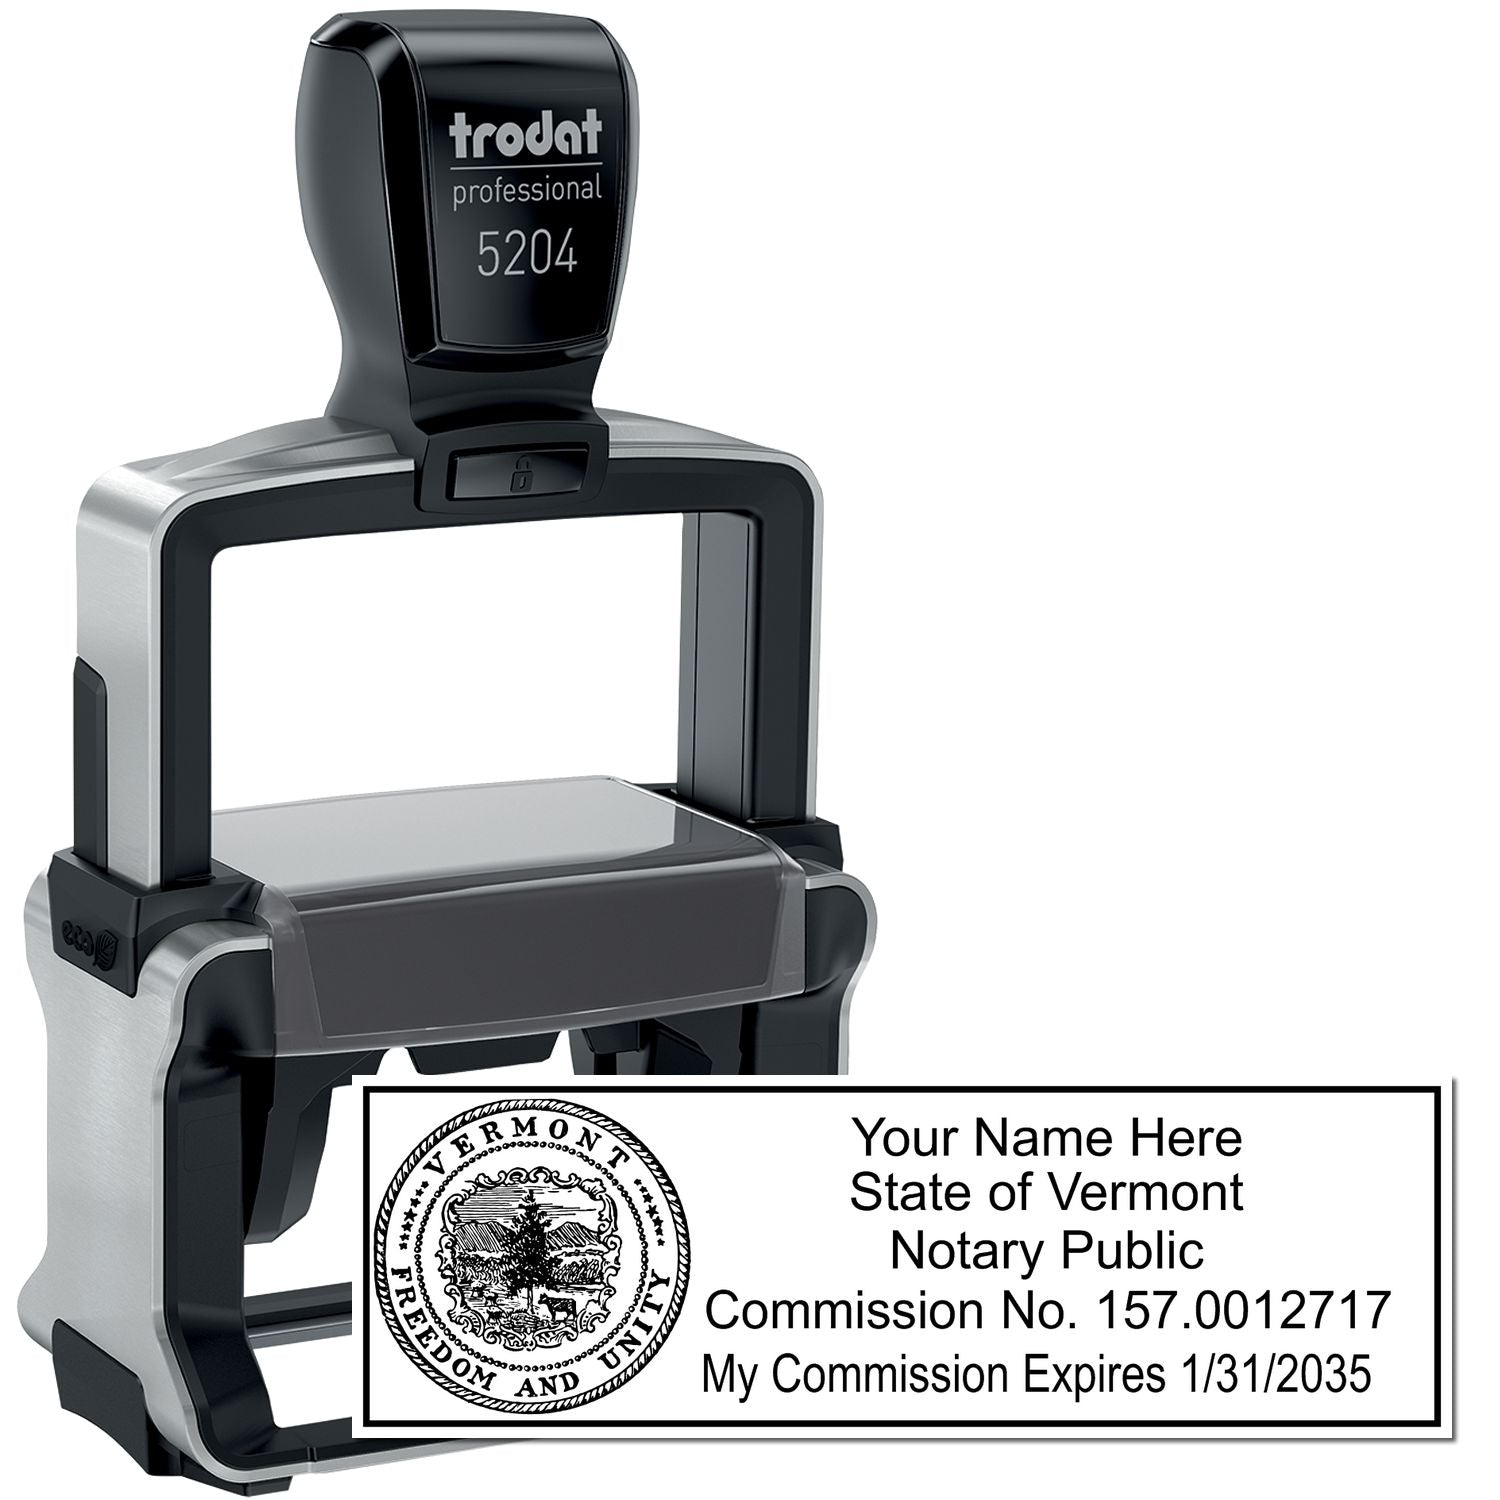 The main image for the Heavy-Duty Vermont Rectangular Notary Stamp depicting a sample of the imprint and electronic files